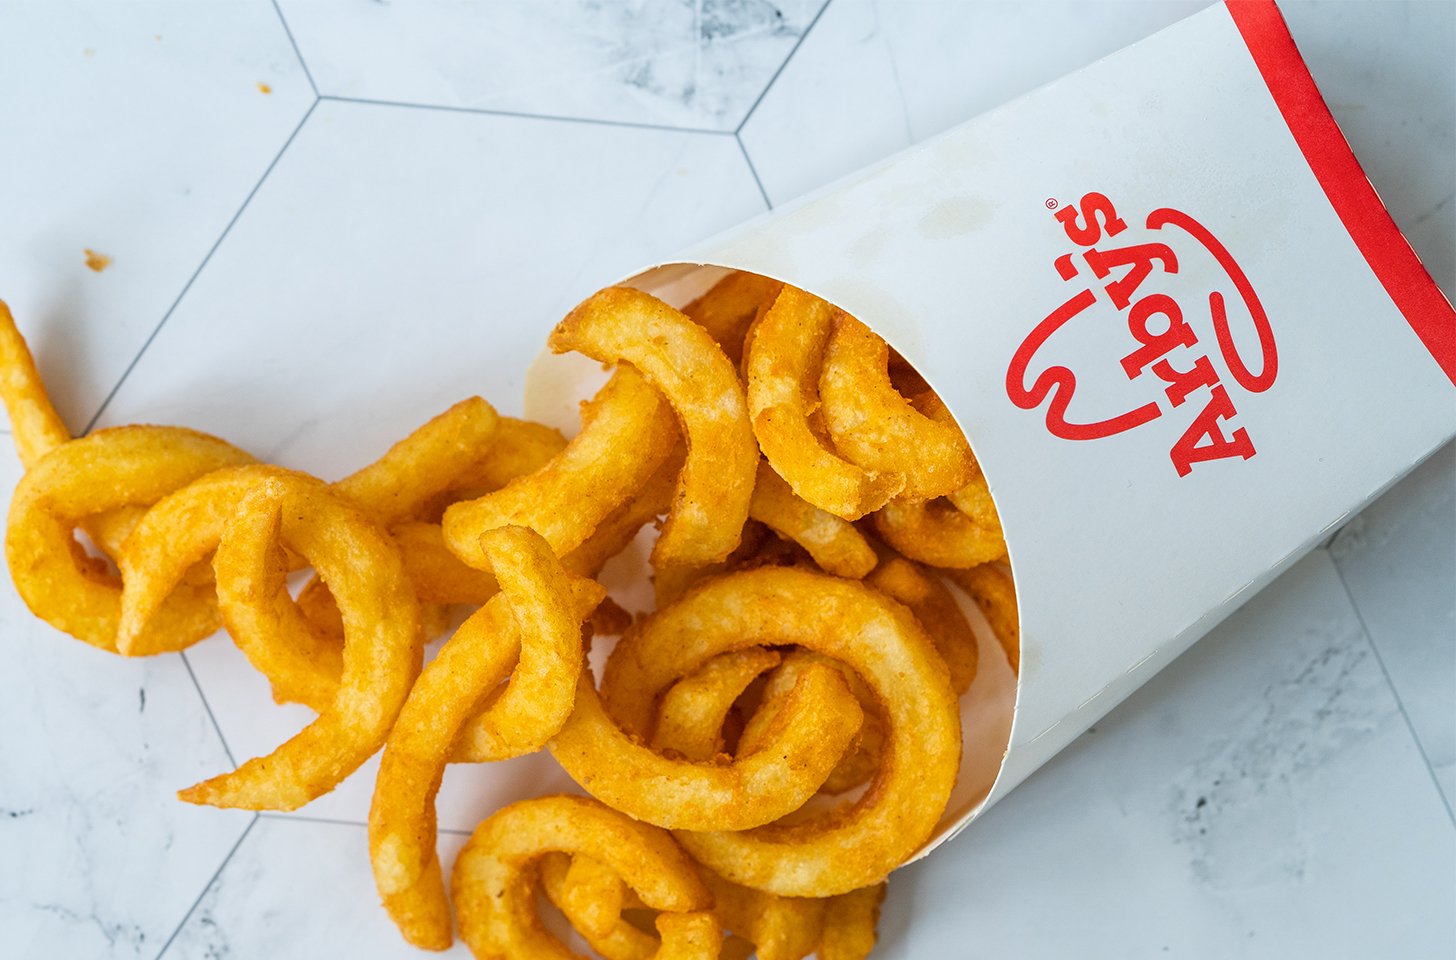 Arby’s French Fry-Flavored vodka is now available. We are curious who asked for this.